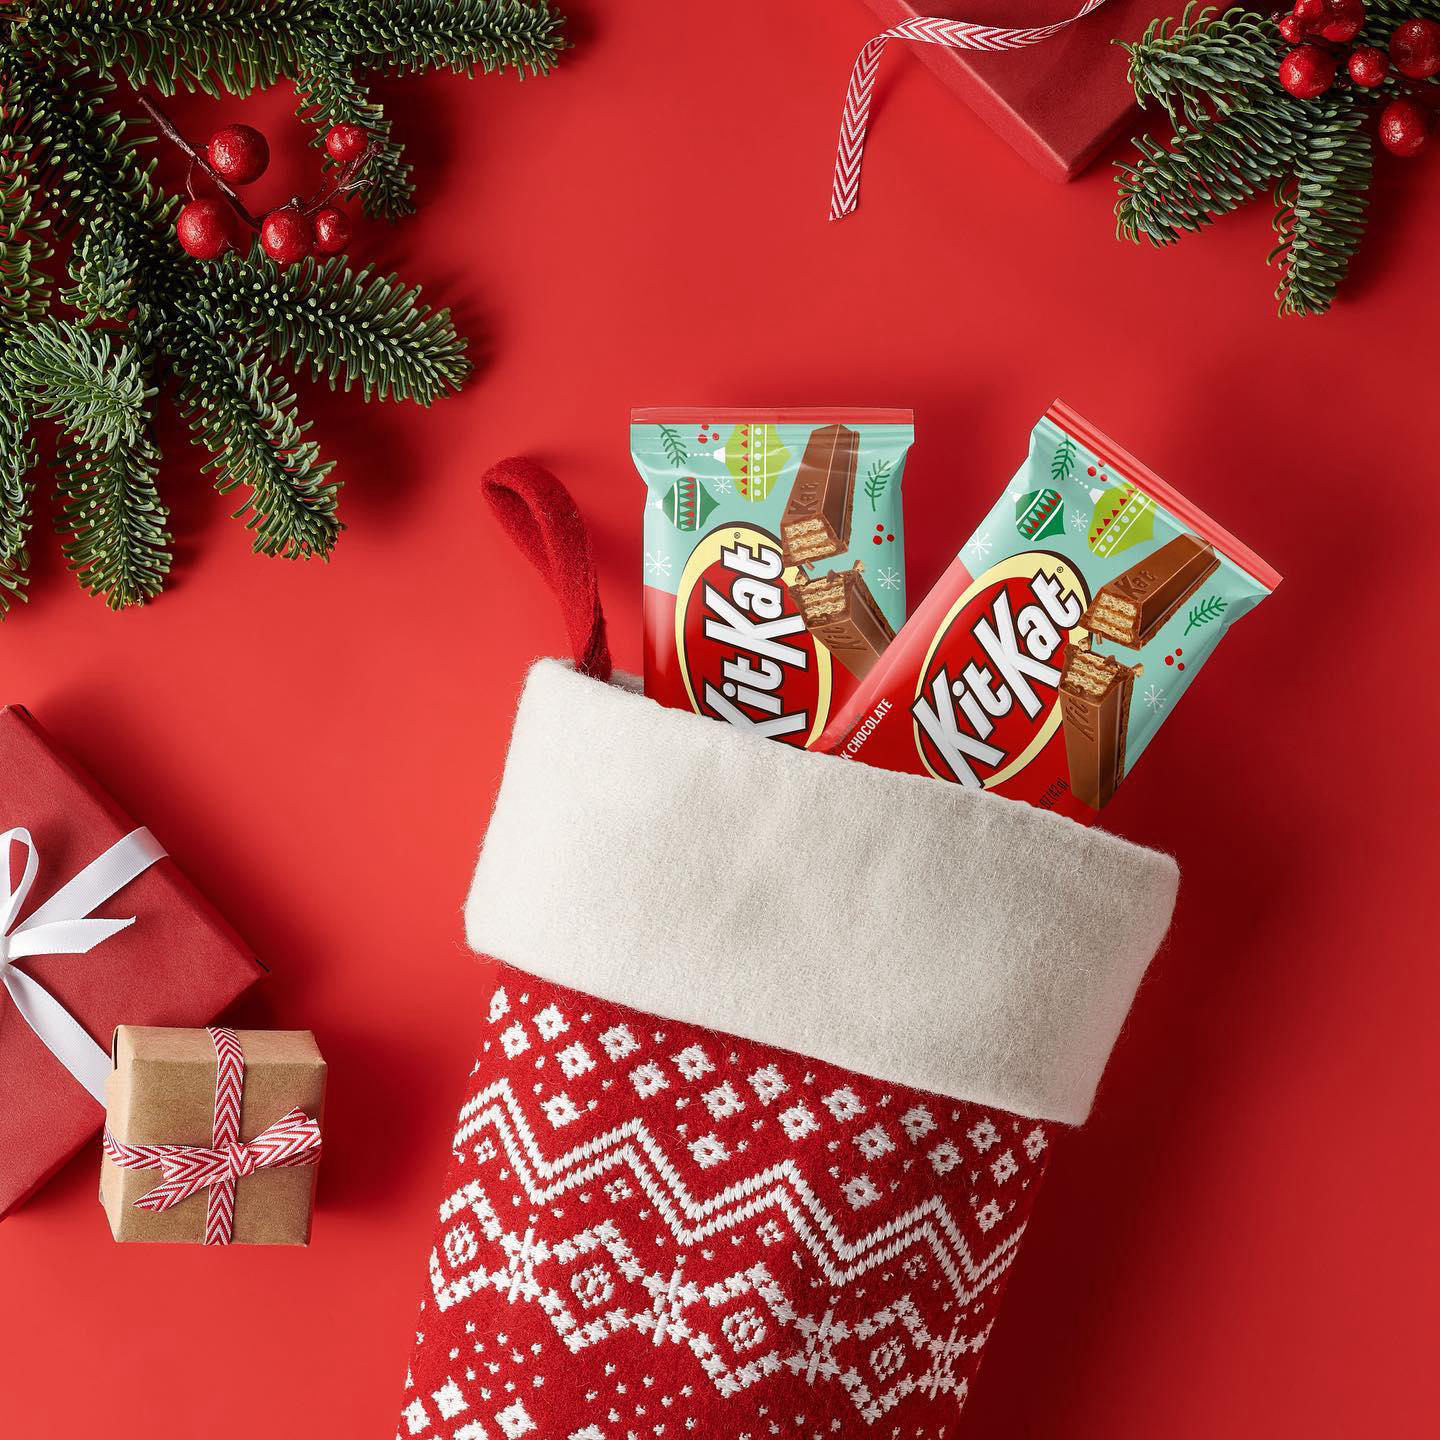 image  1 Kit Kat - A stocking stuffer that will make days happy and bright